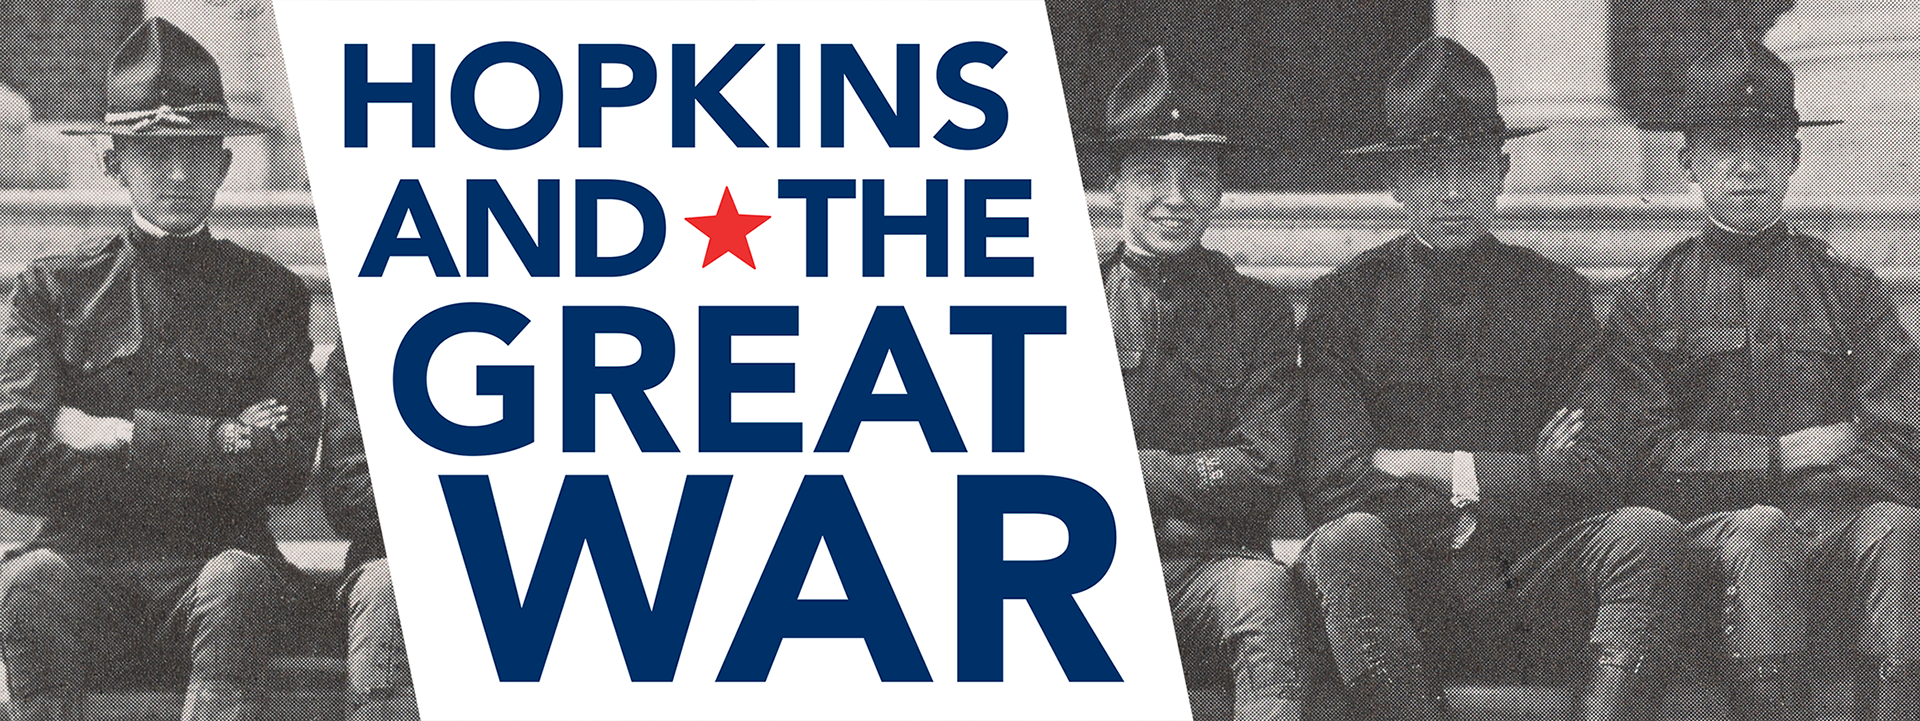 A banner for an online exhibit with the title "Hopkins and the Great War". A red star sits in the center of the title. Behind the title are black and white images of soldiers in uniform sitting on marble steps.